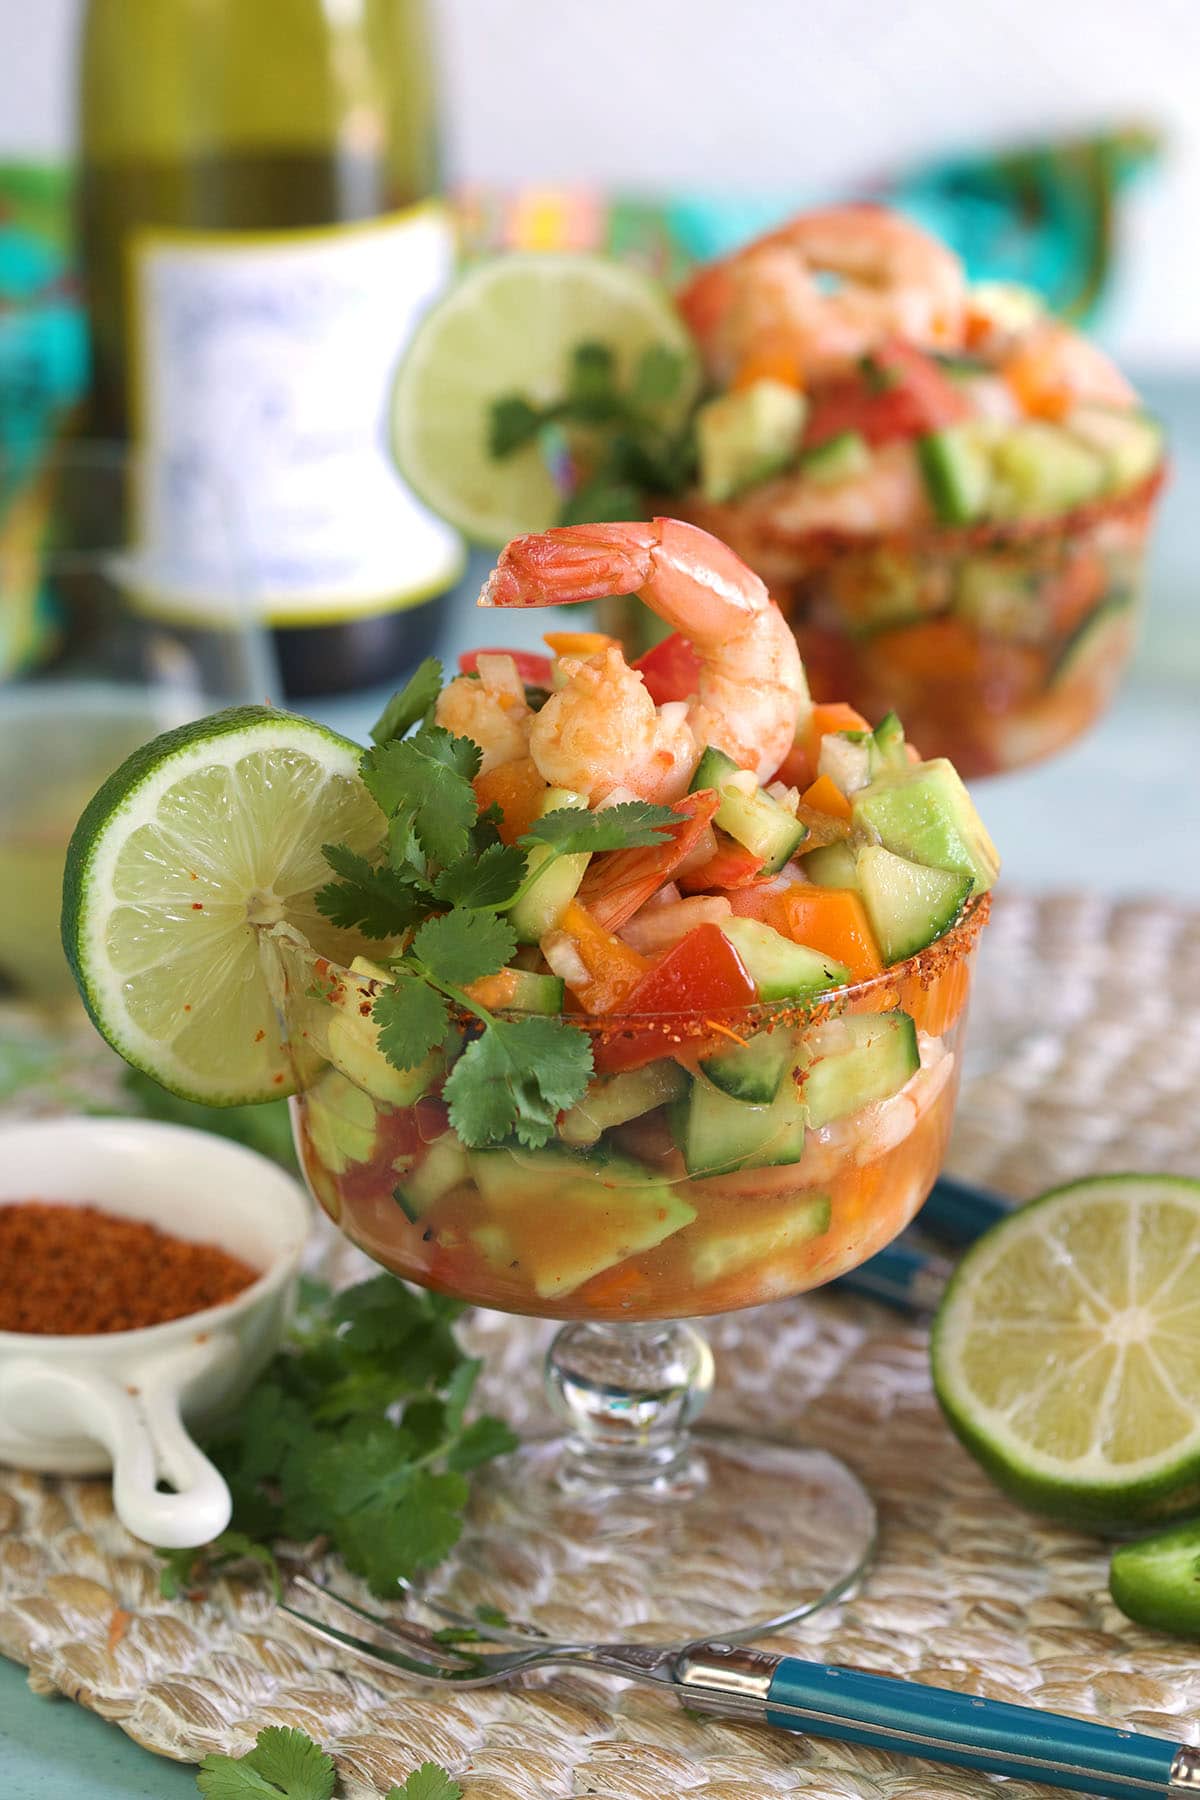 A shrimp cocktail is presented with a slice of lime on the side of the glass.